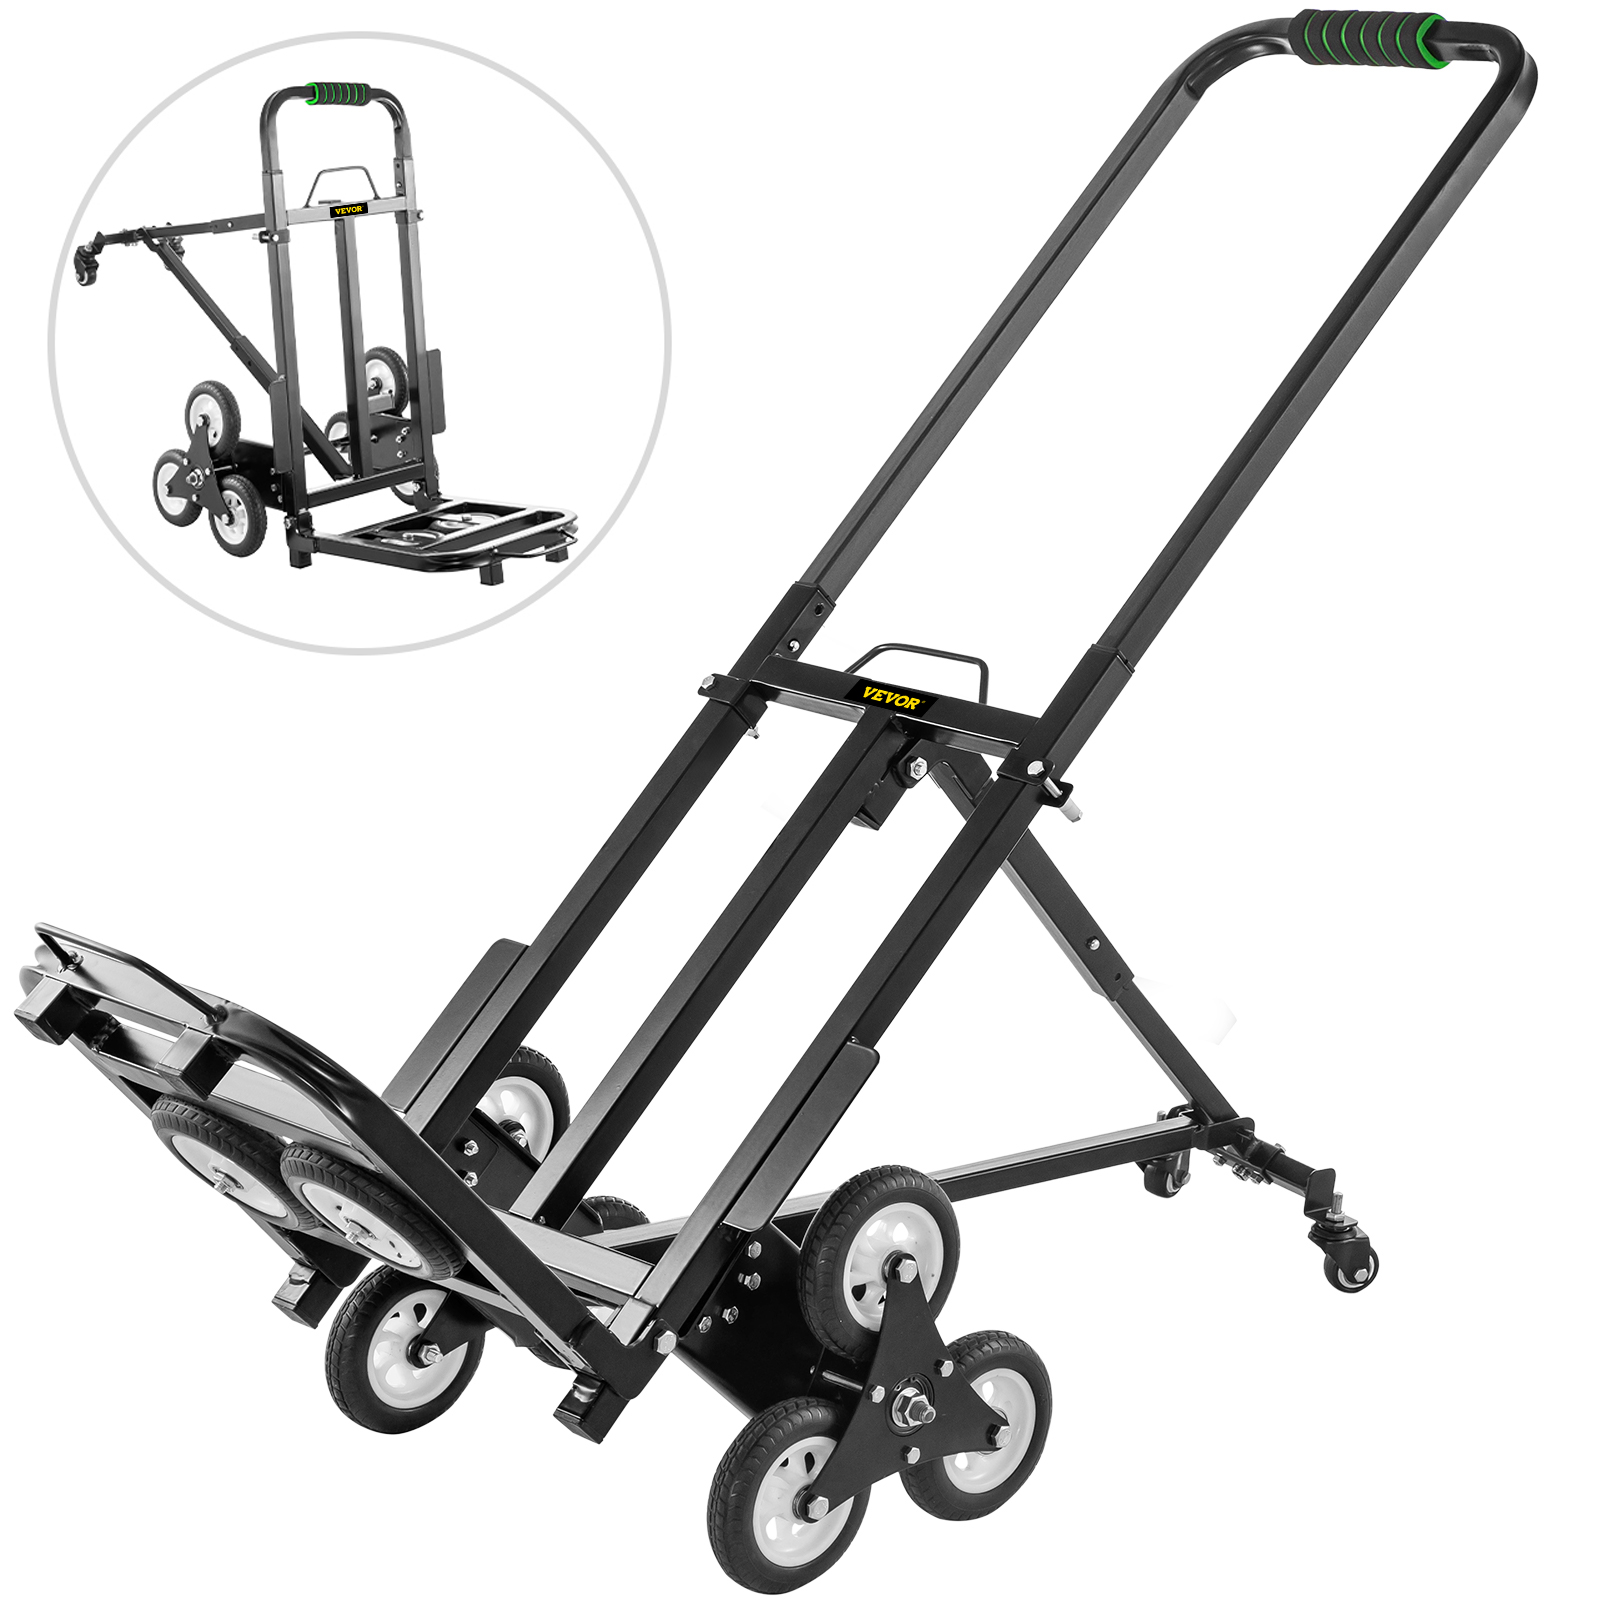 NEW~Foldable Luggage Stair Climber Hand Truck Cart Transport Trolley Heavy Duty 